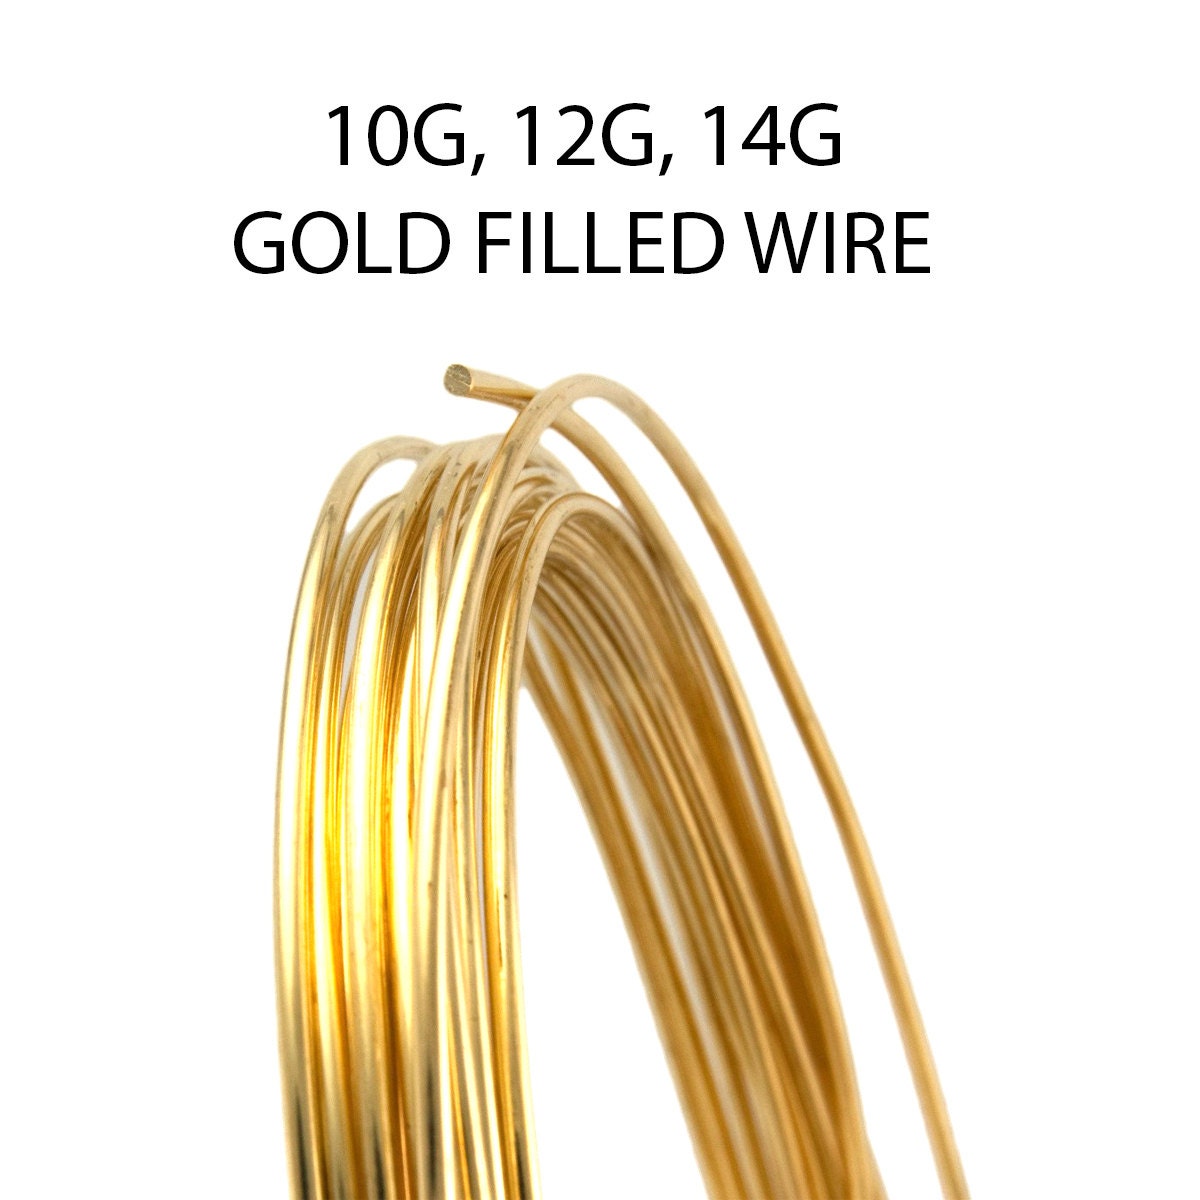 14 Gauge Round Copper Wire, Silver Plated, Gold Plated, Rose-gold